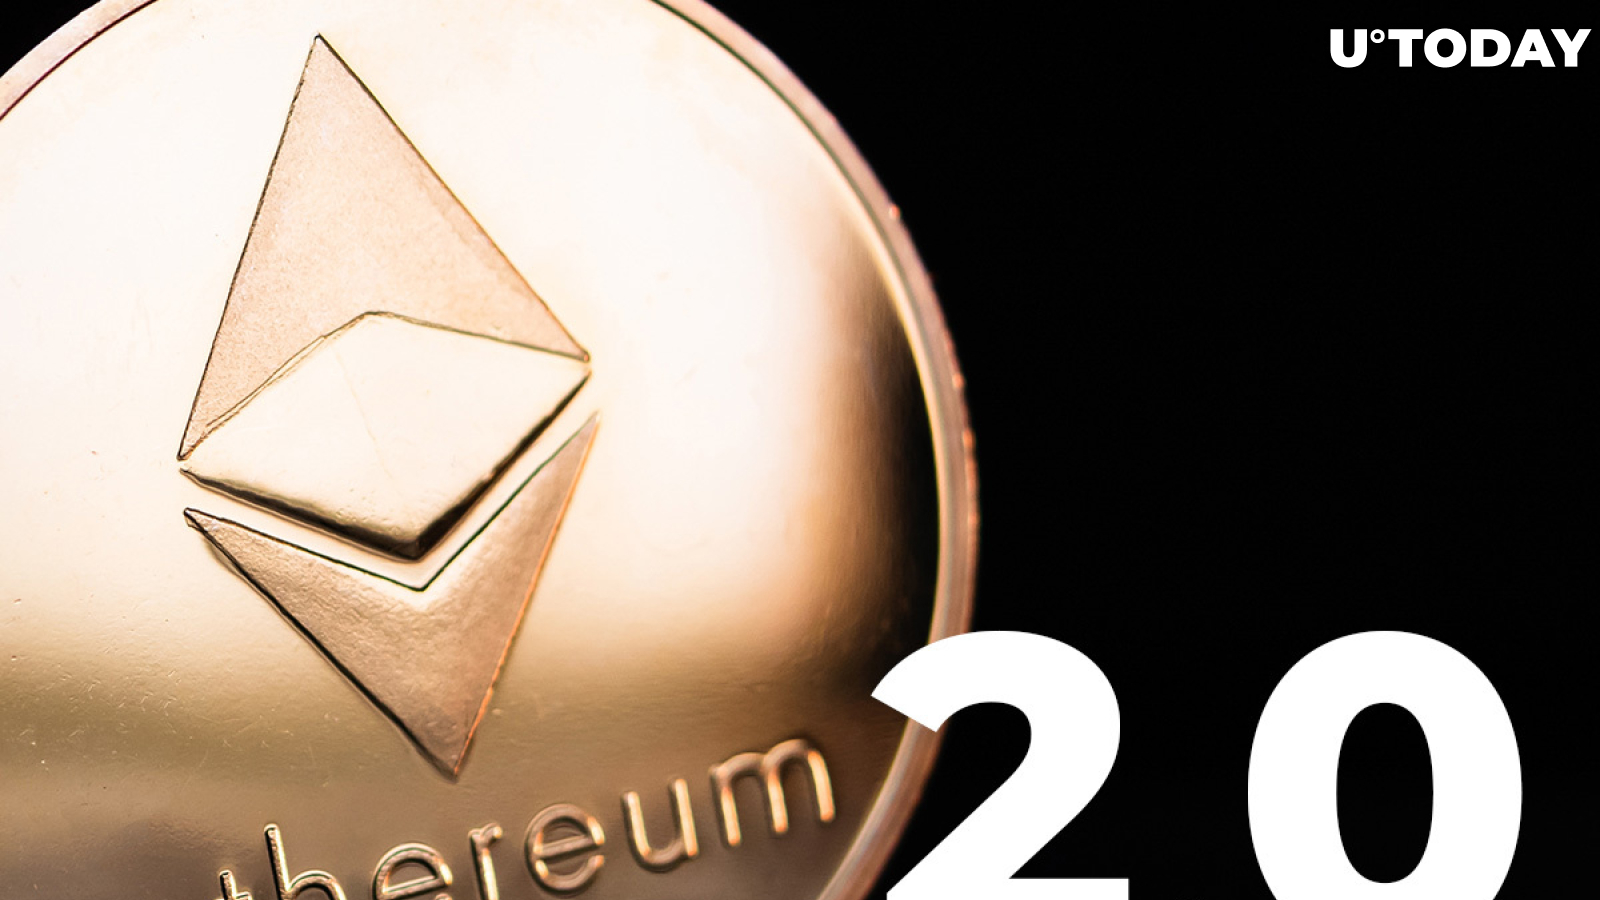 Ethereum 2.0 Deposit Contract Larger Than Ever Before